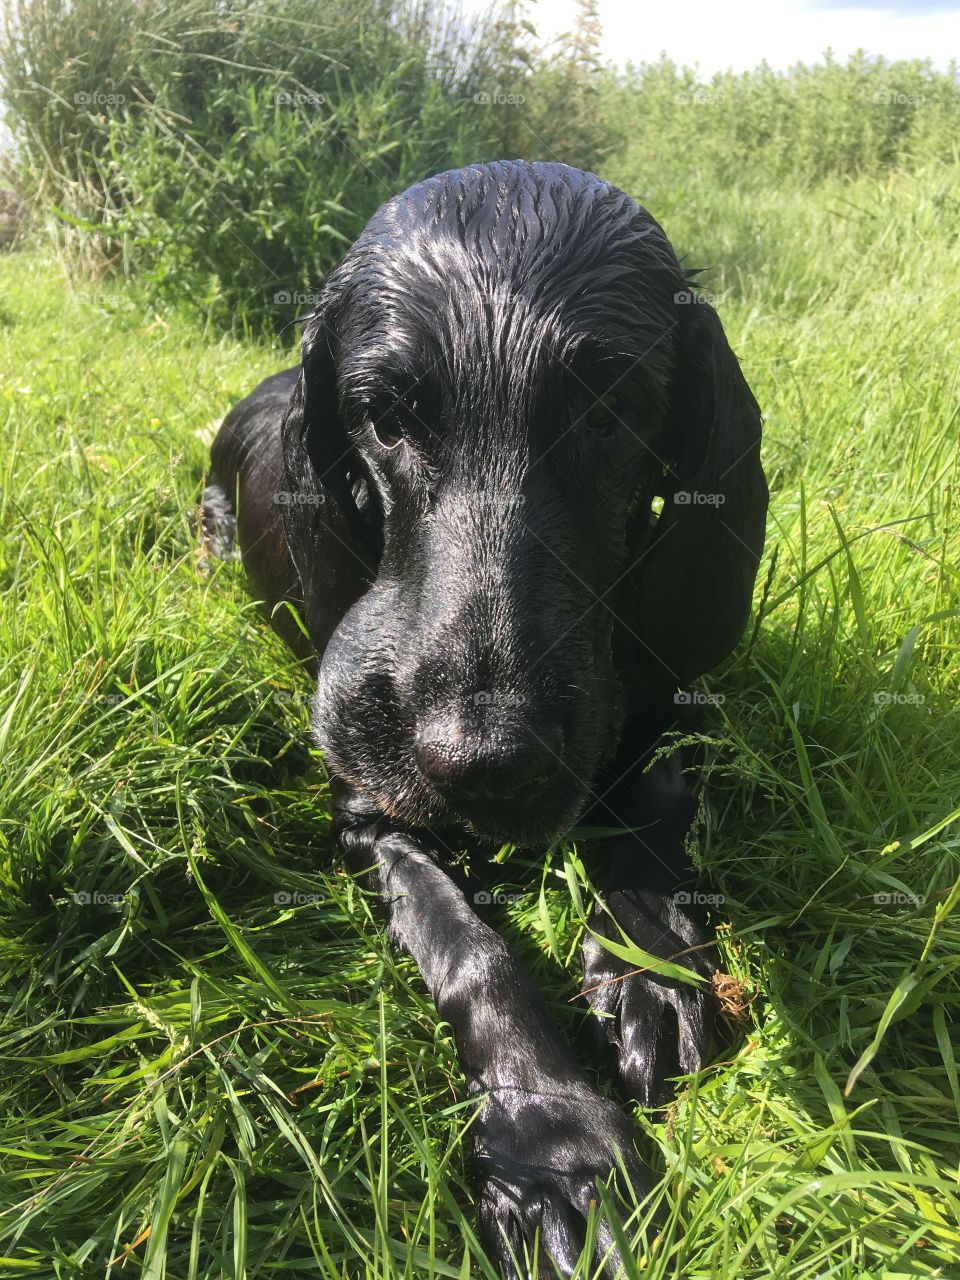 A break from leaping into the river, this flatcoat retriever is dripping wet and shines in the sunlight. Her ball appears as a bulge to one side of her mouth 